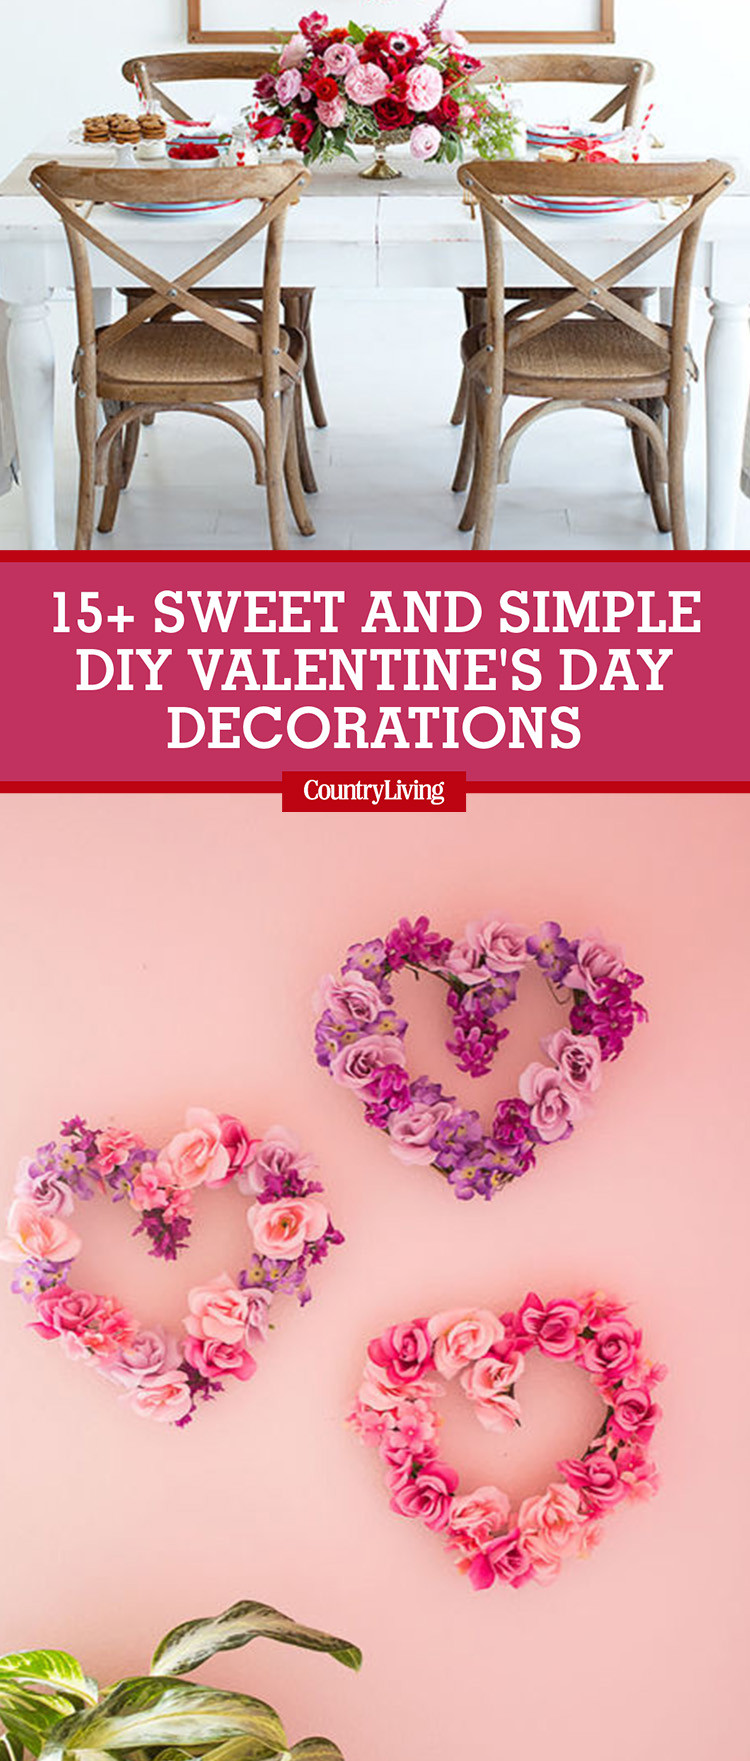 DIY Valentines Day Decor
 18 Sweet and Simple DIY Valentine s Day Decorations